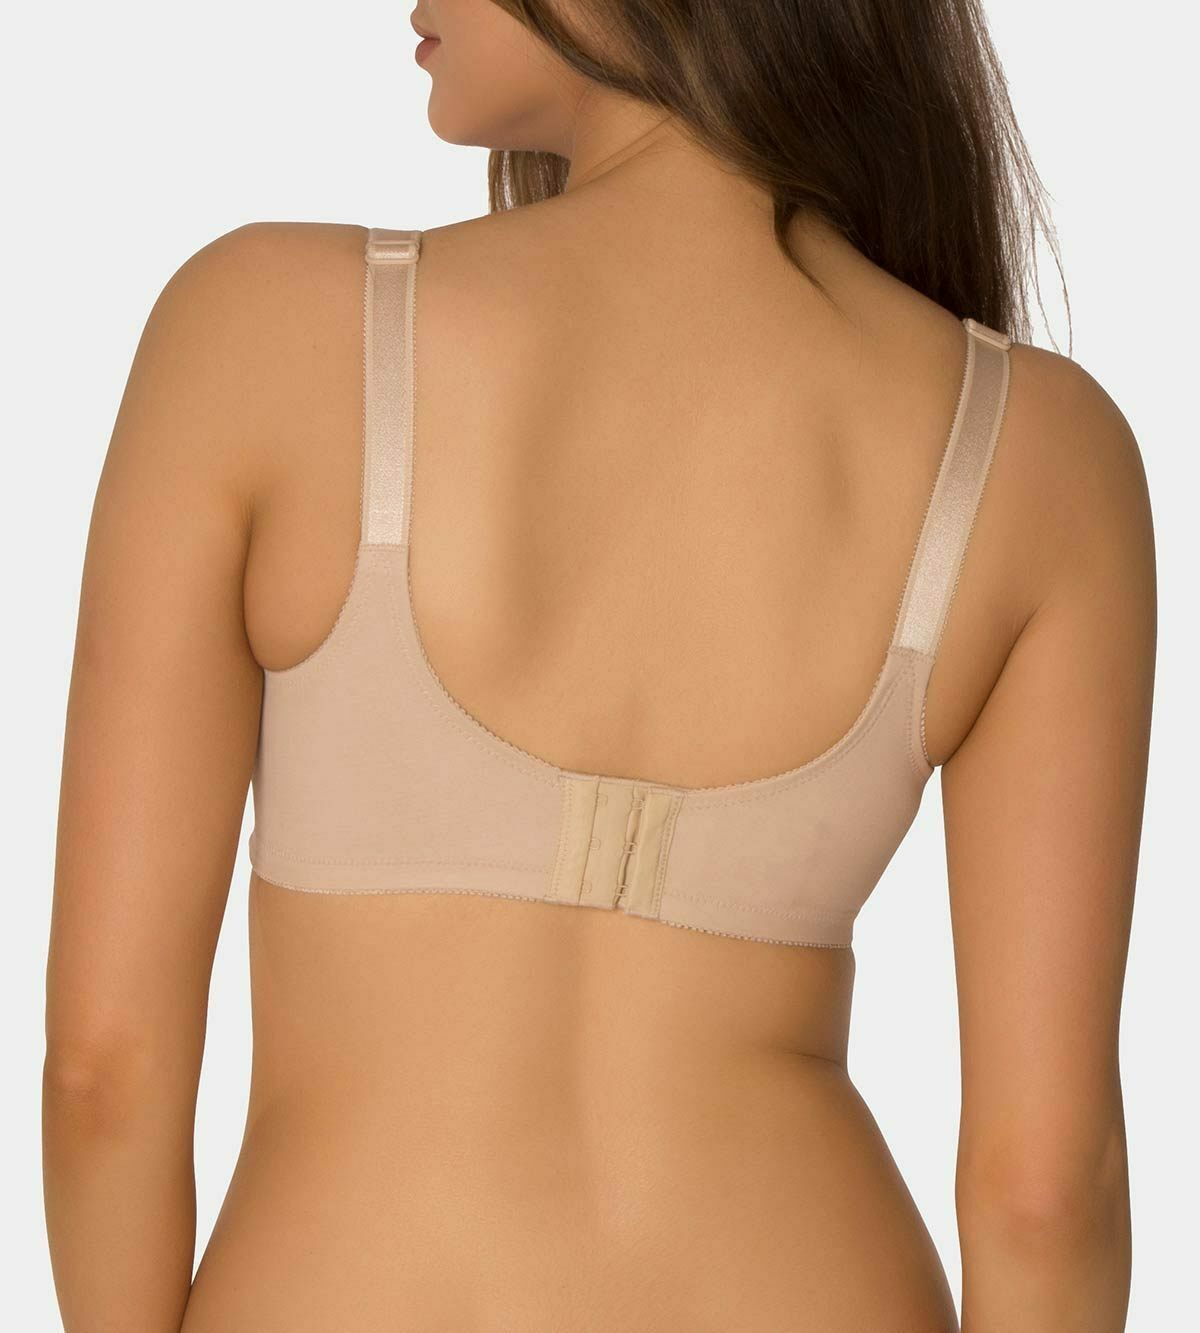 Bra types in Sri Lanka, Price, and recommendations